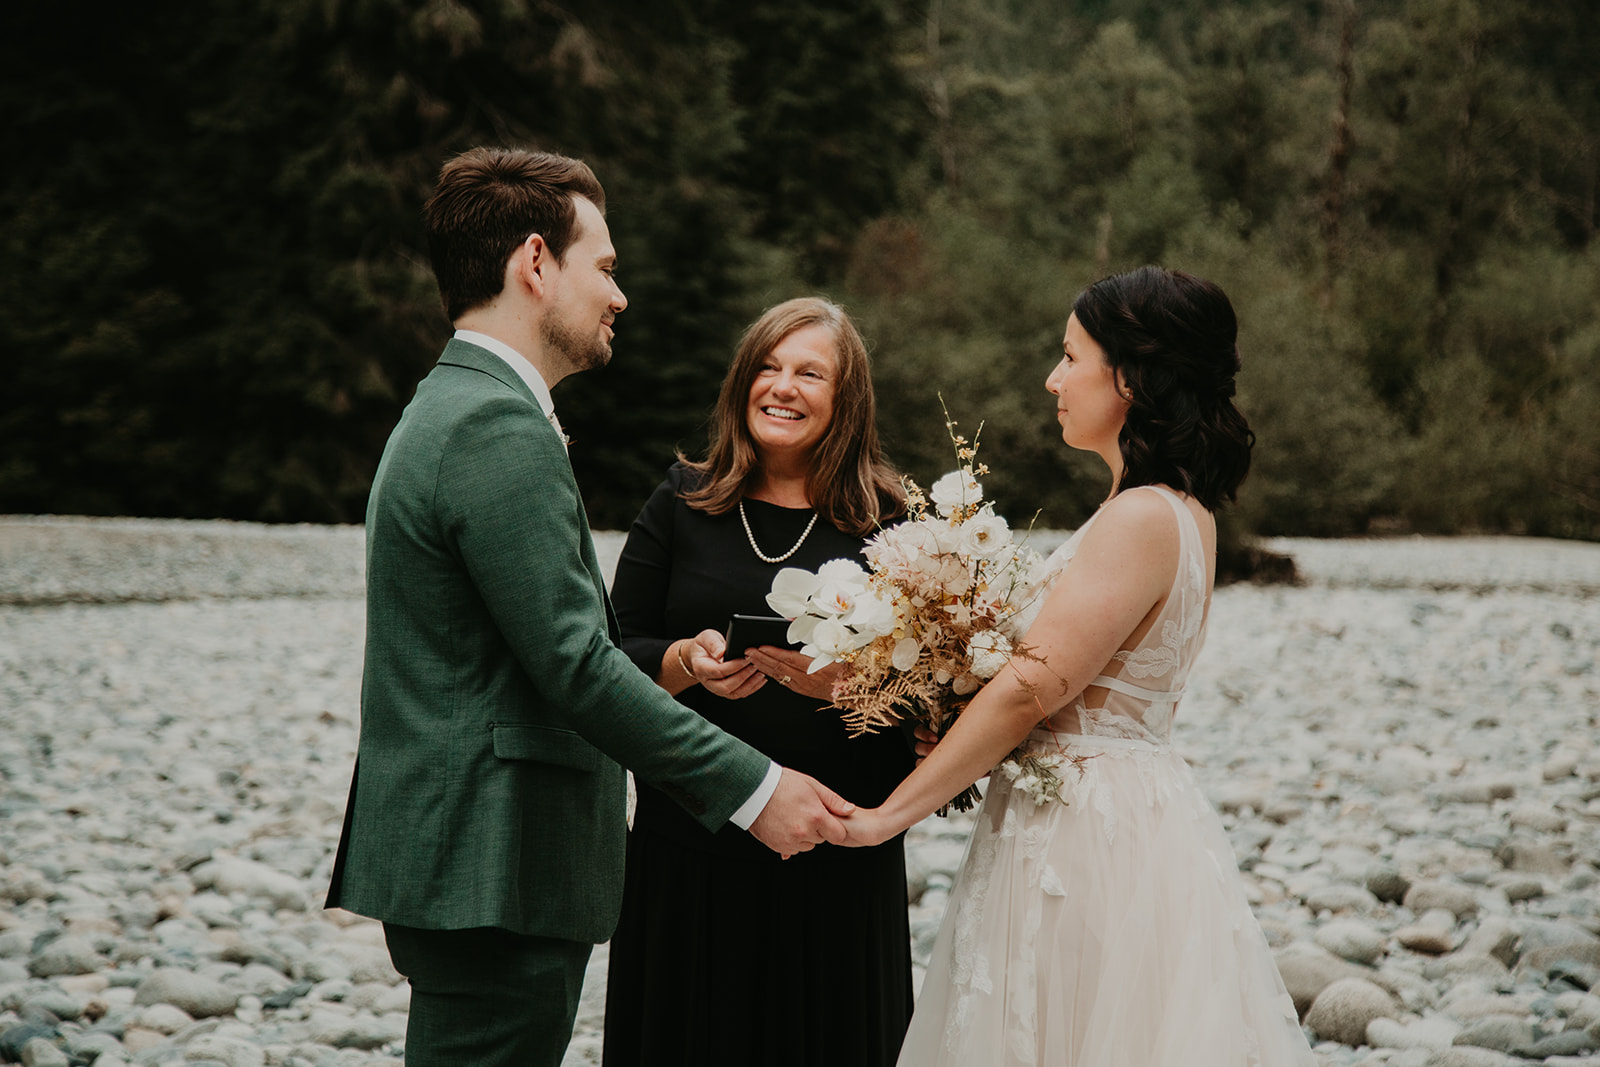 What Is A Wedding Officiant? Are they legally authorized?